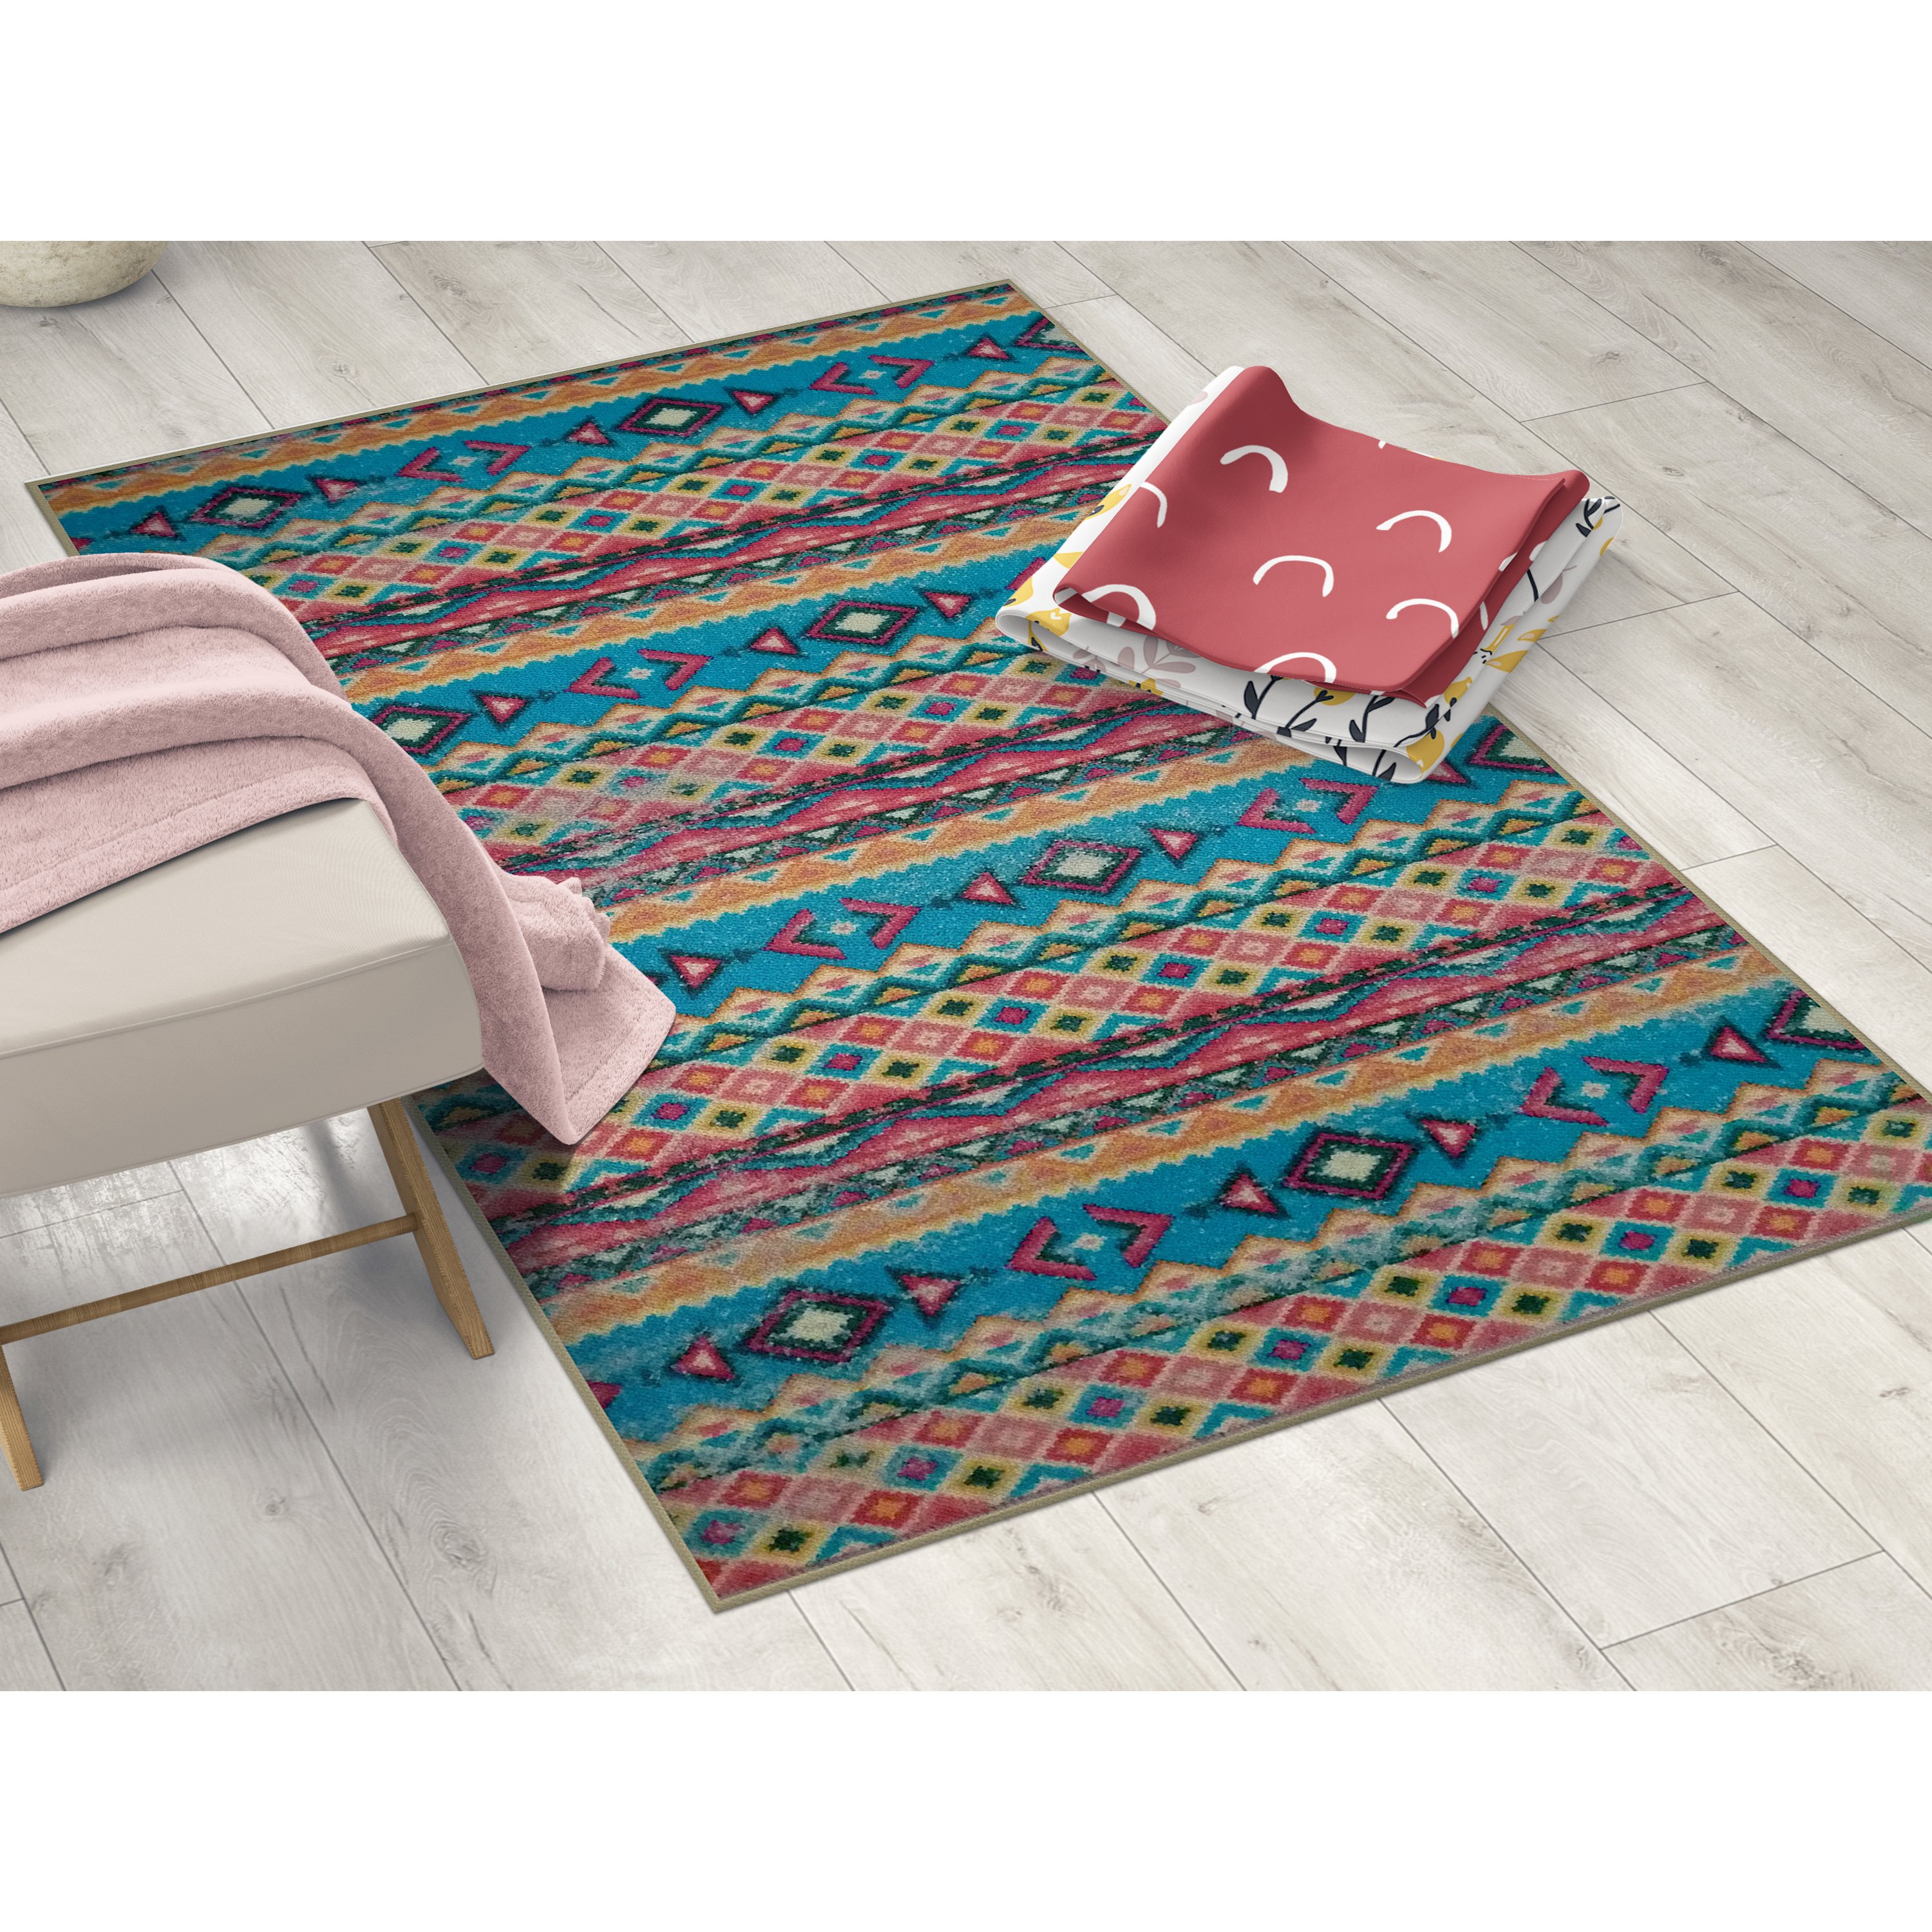 Deerlux Boho Living Room Area Rug With Nonslip Backing, Turquoise Aztec Pattern - 5 X 7